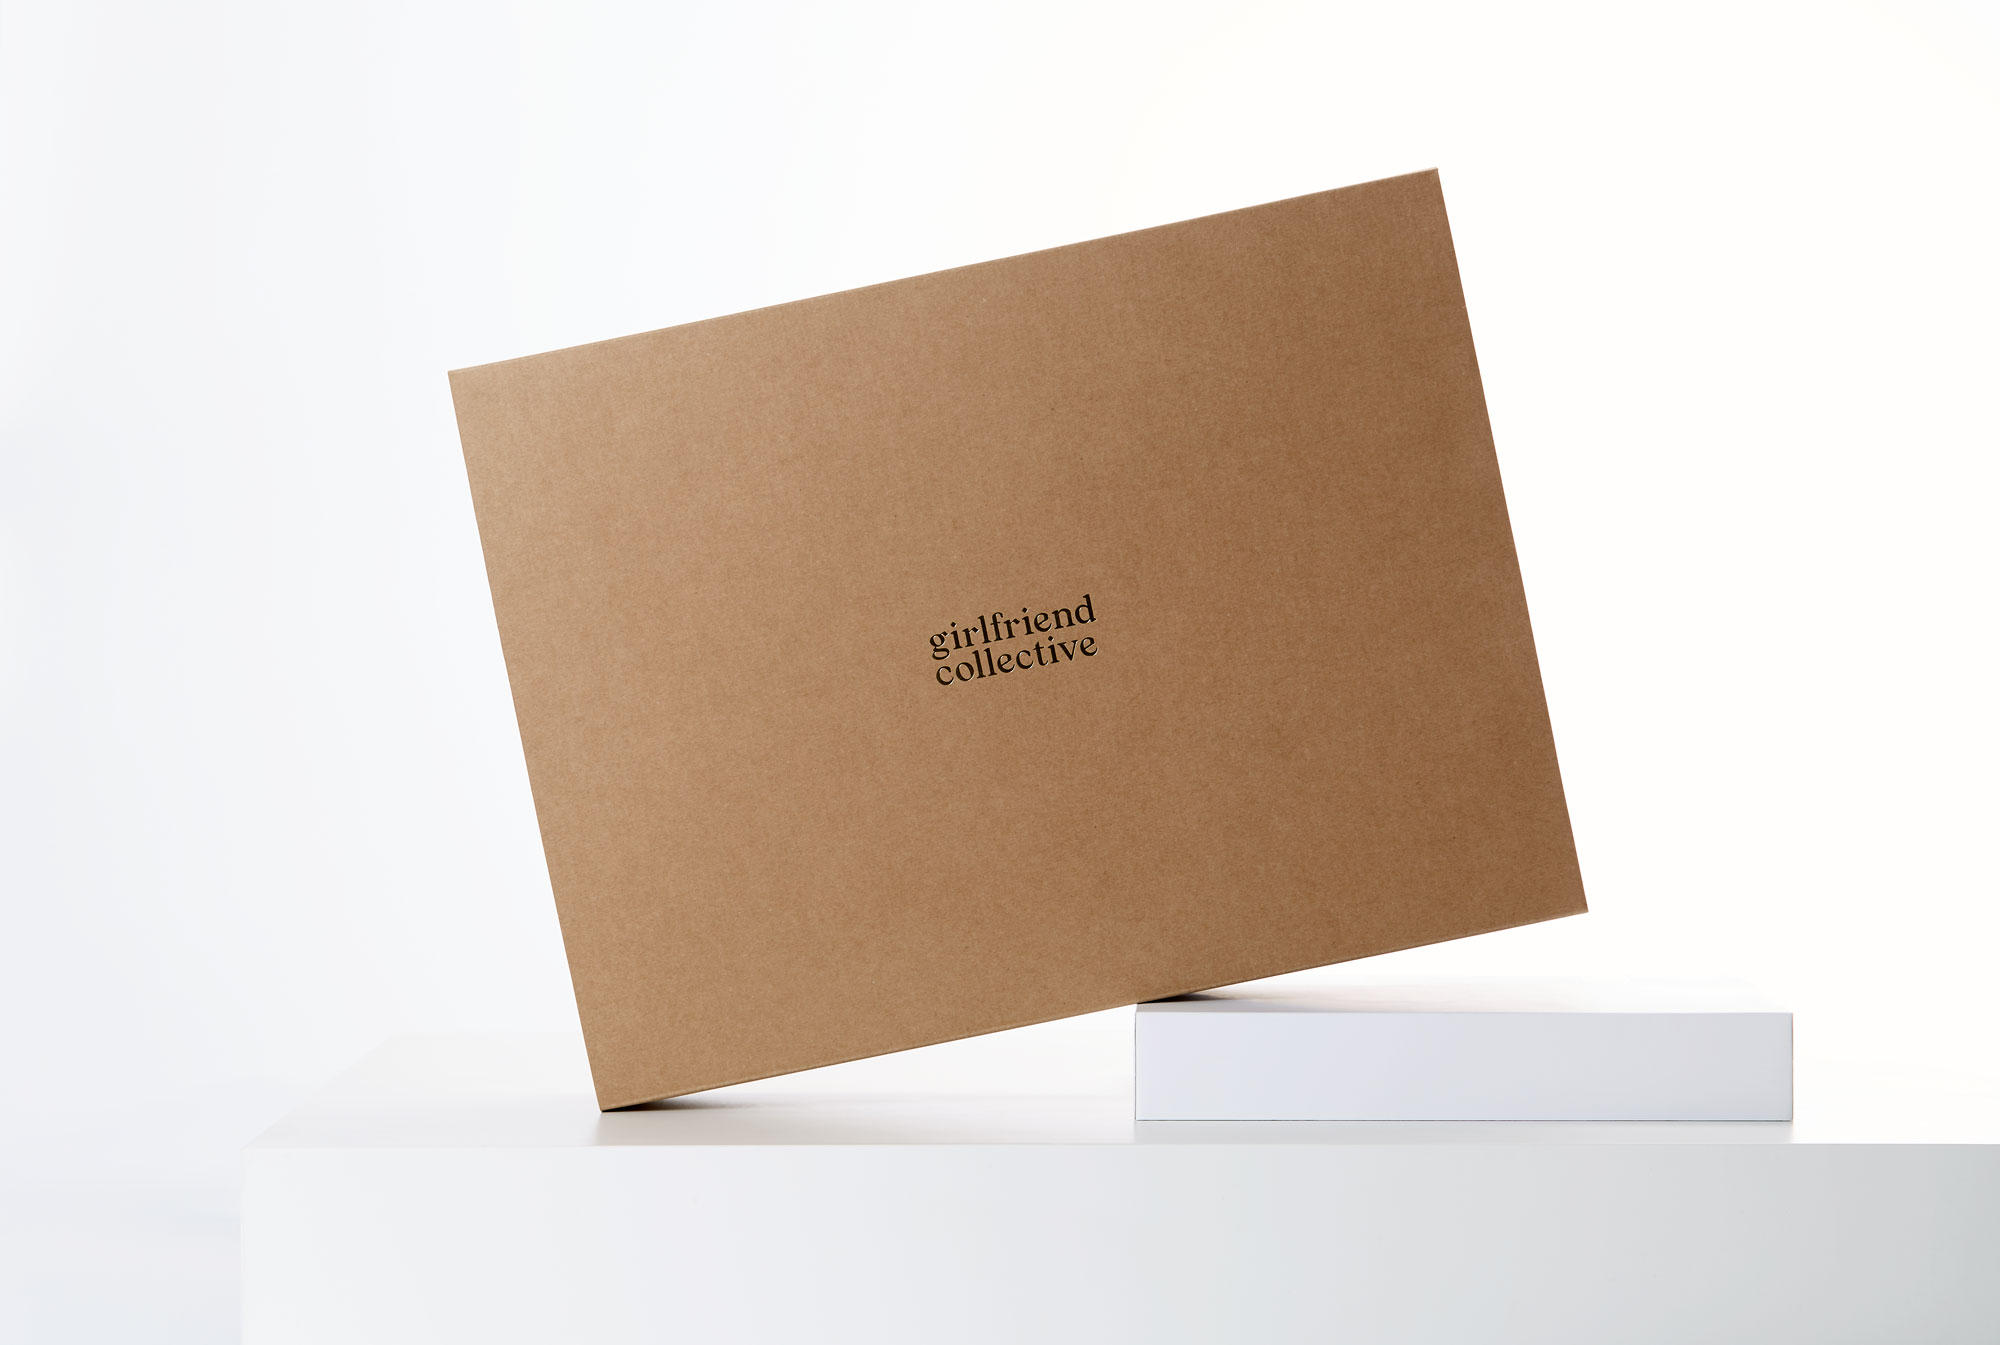 Girlfriend Collective E-Commerce Packaging 